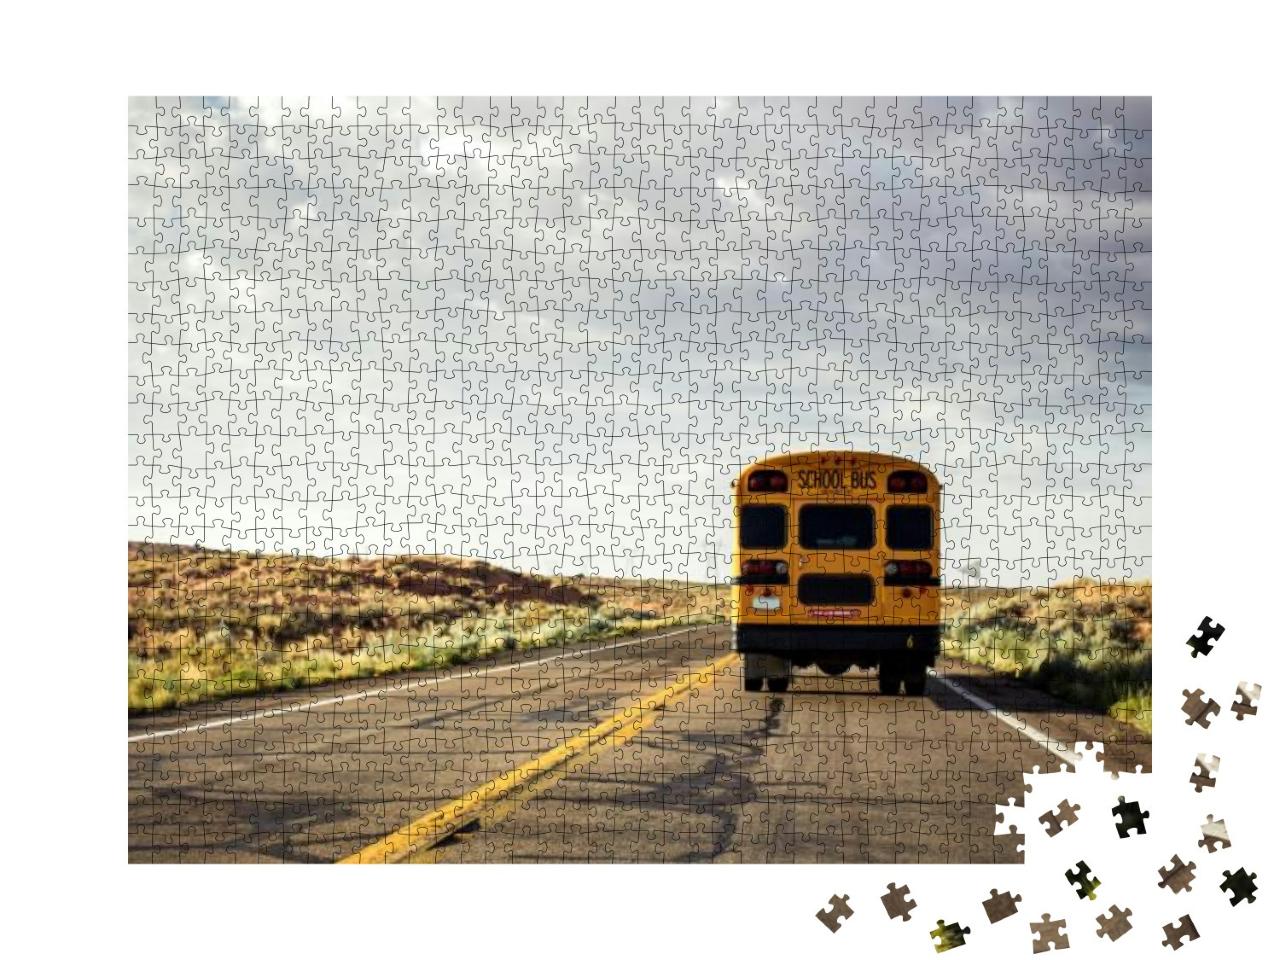 Yellow School Bus on the Road, USA... Jigsaw Puzzle with 1000 pieces